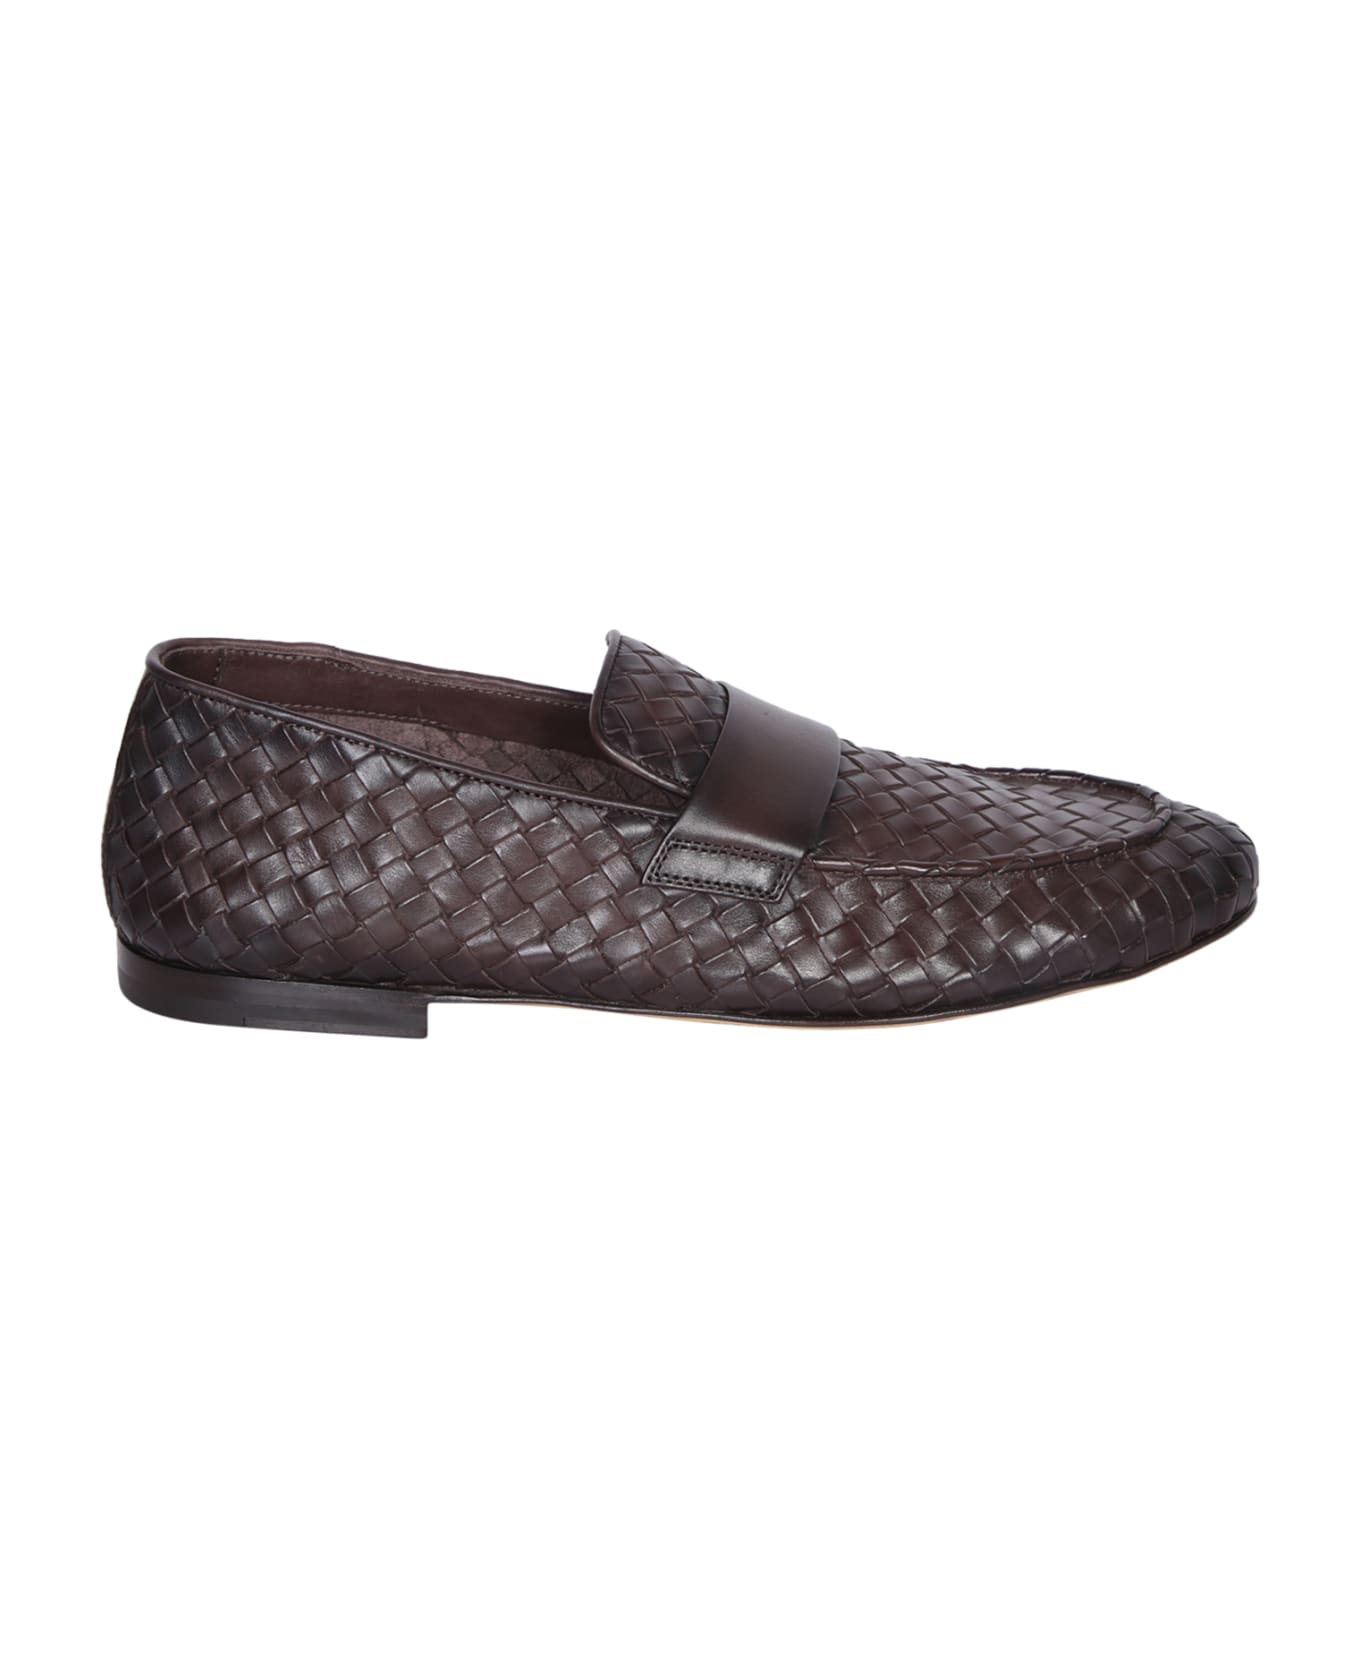 Officine Creative Airto 011 Braided Brown Loafer - Brown